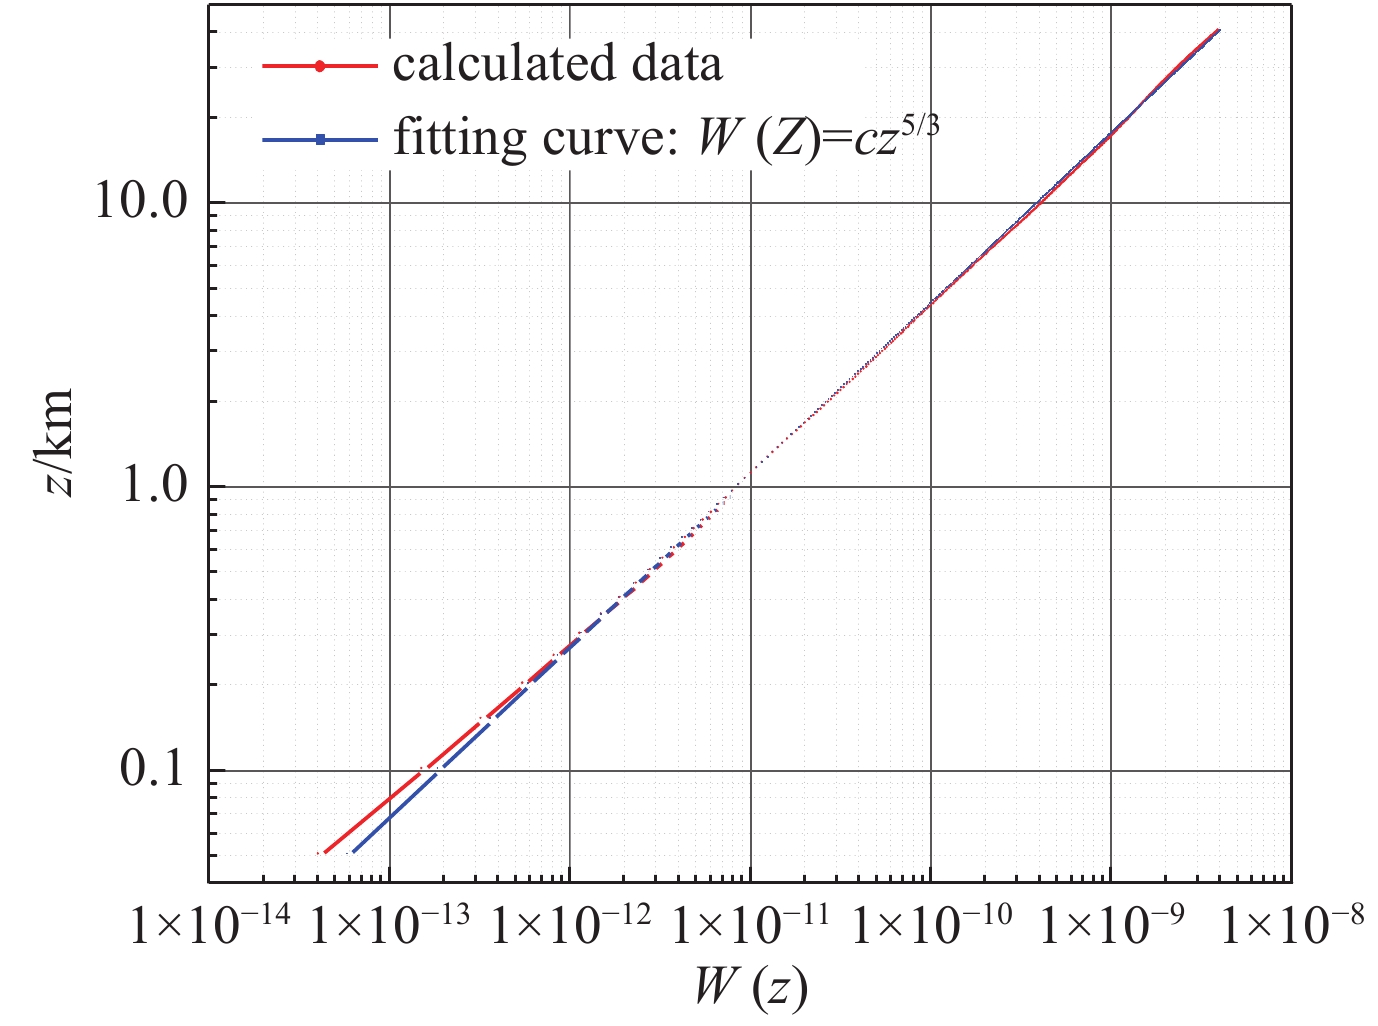 Calculated value of W(z) compared with its fitting curve